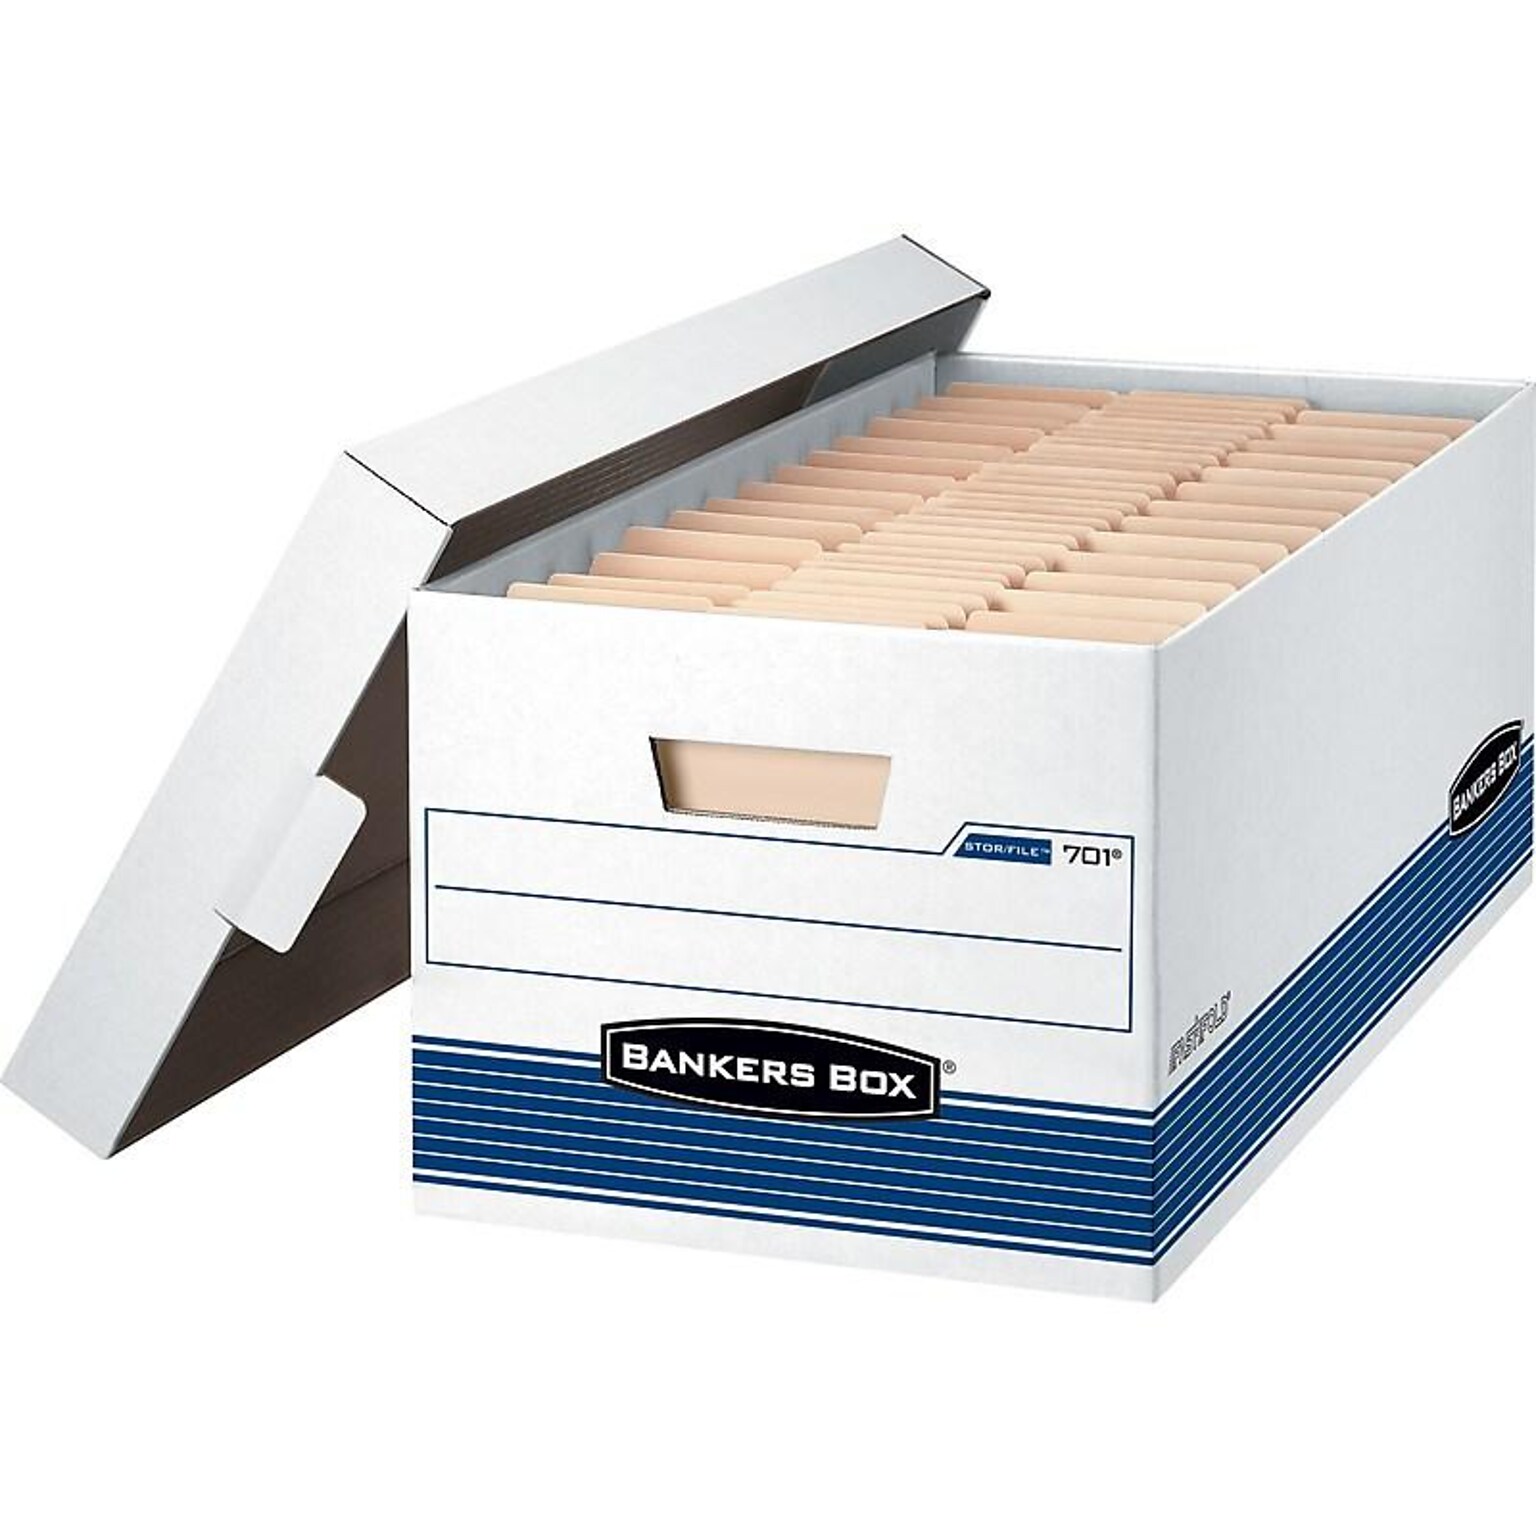 Bankers Box® Medium-Duty Corrugated File Storage Boxes, Lift-Off Lid, Letter Size, White/Blue, 4/Carton (007014)